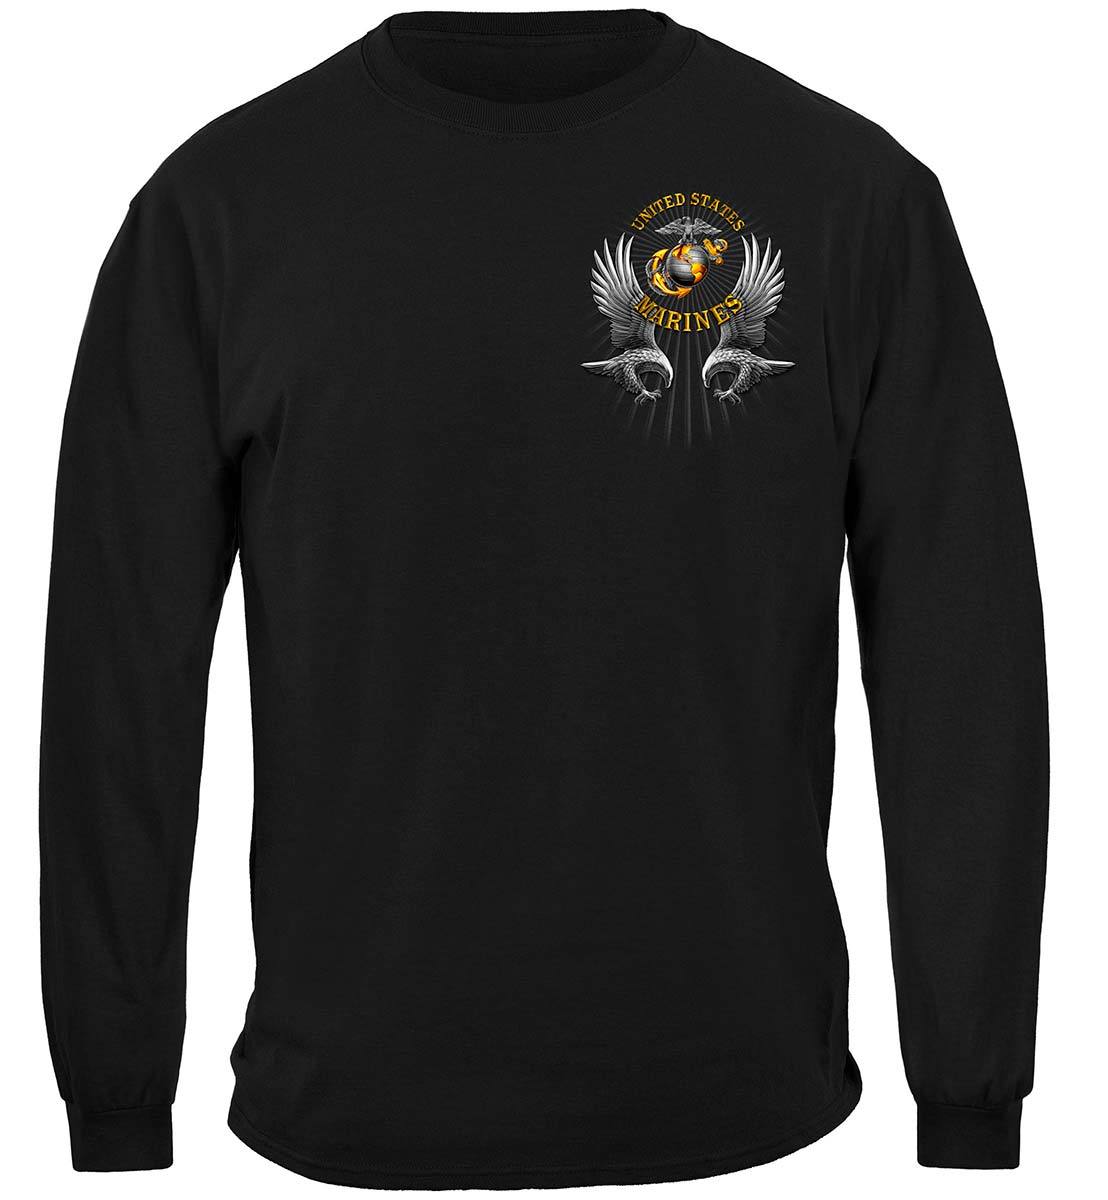 USMC Marine Corps Founded Date 1775 Premium Long Sleeves